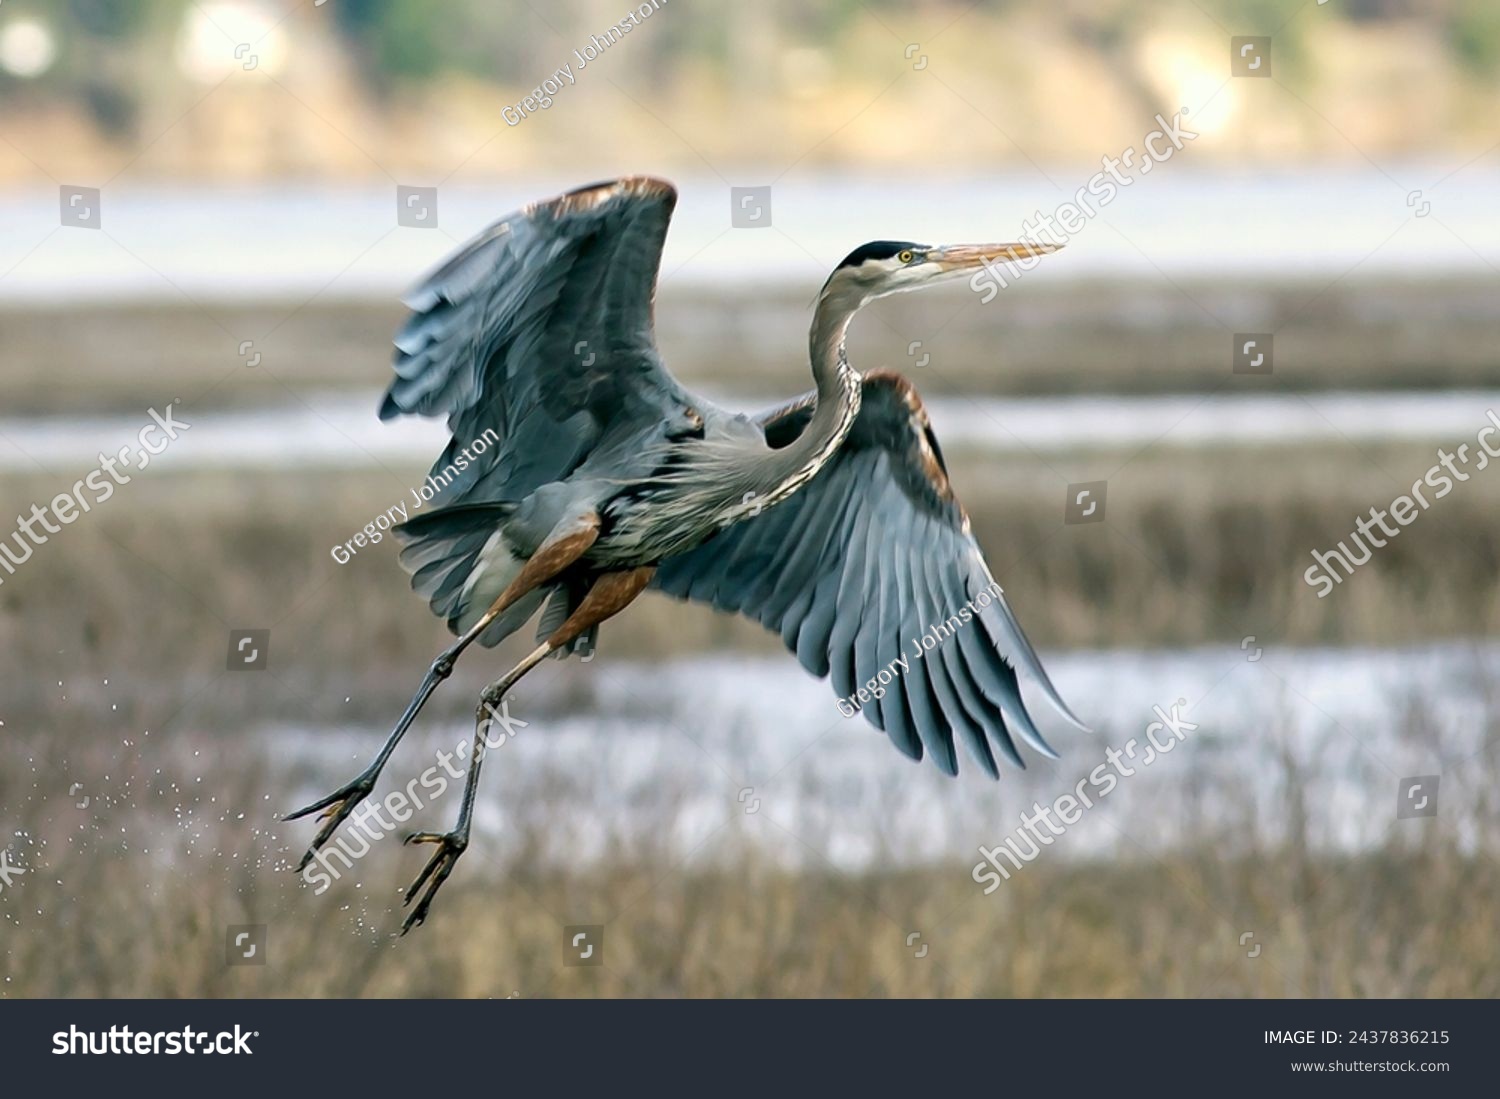 A great blue heron takes off from a wetlands area. #2437836215